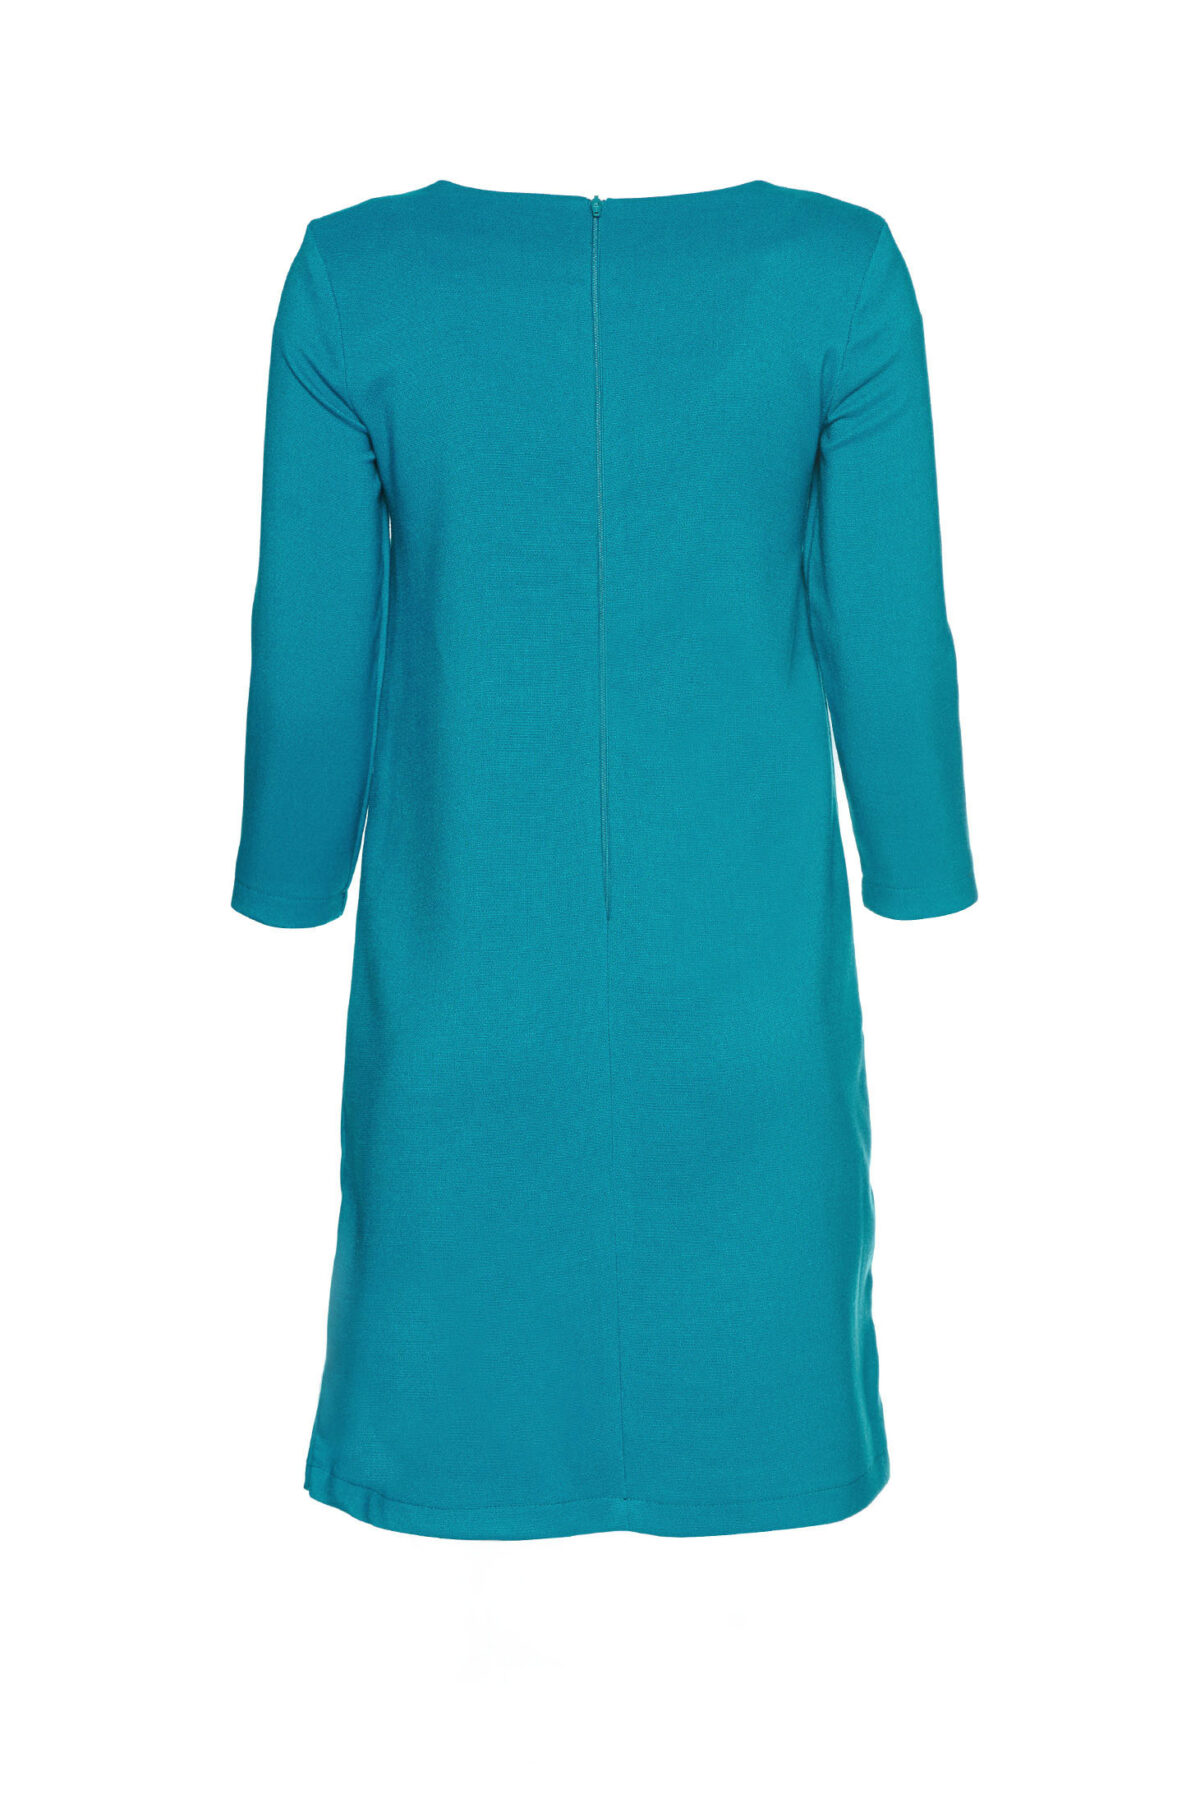 Theo Rose Magic Turquoise Embroidered Dress